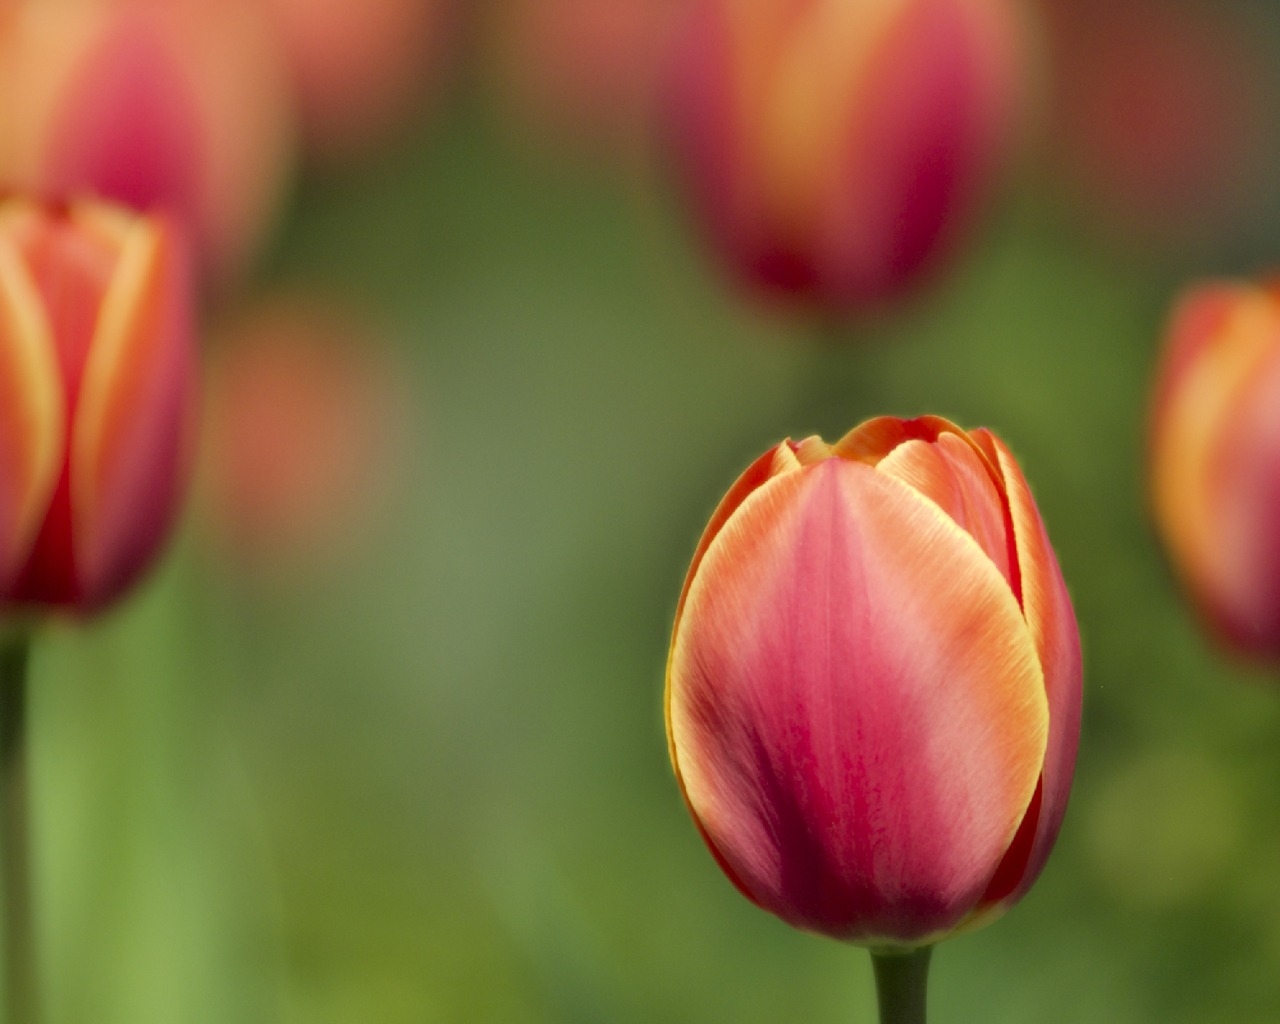 Tulips for 1280 x 1024 resolution